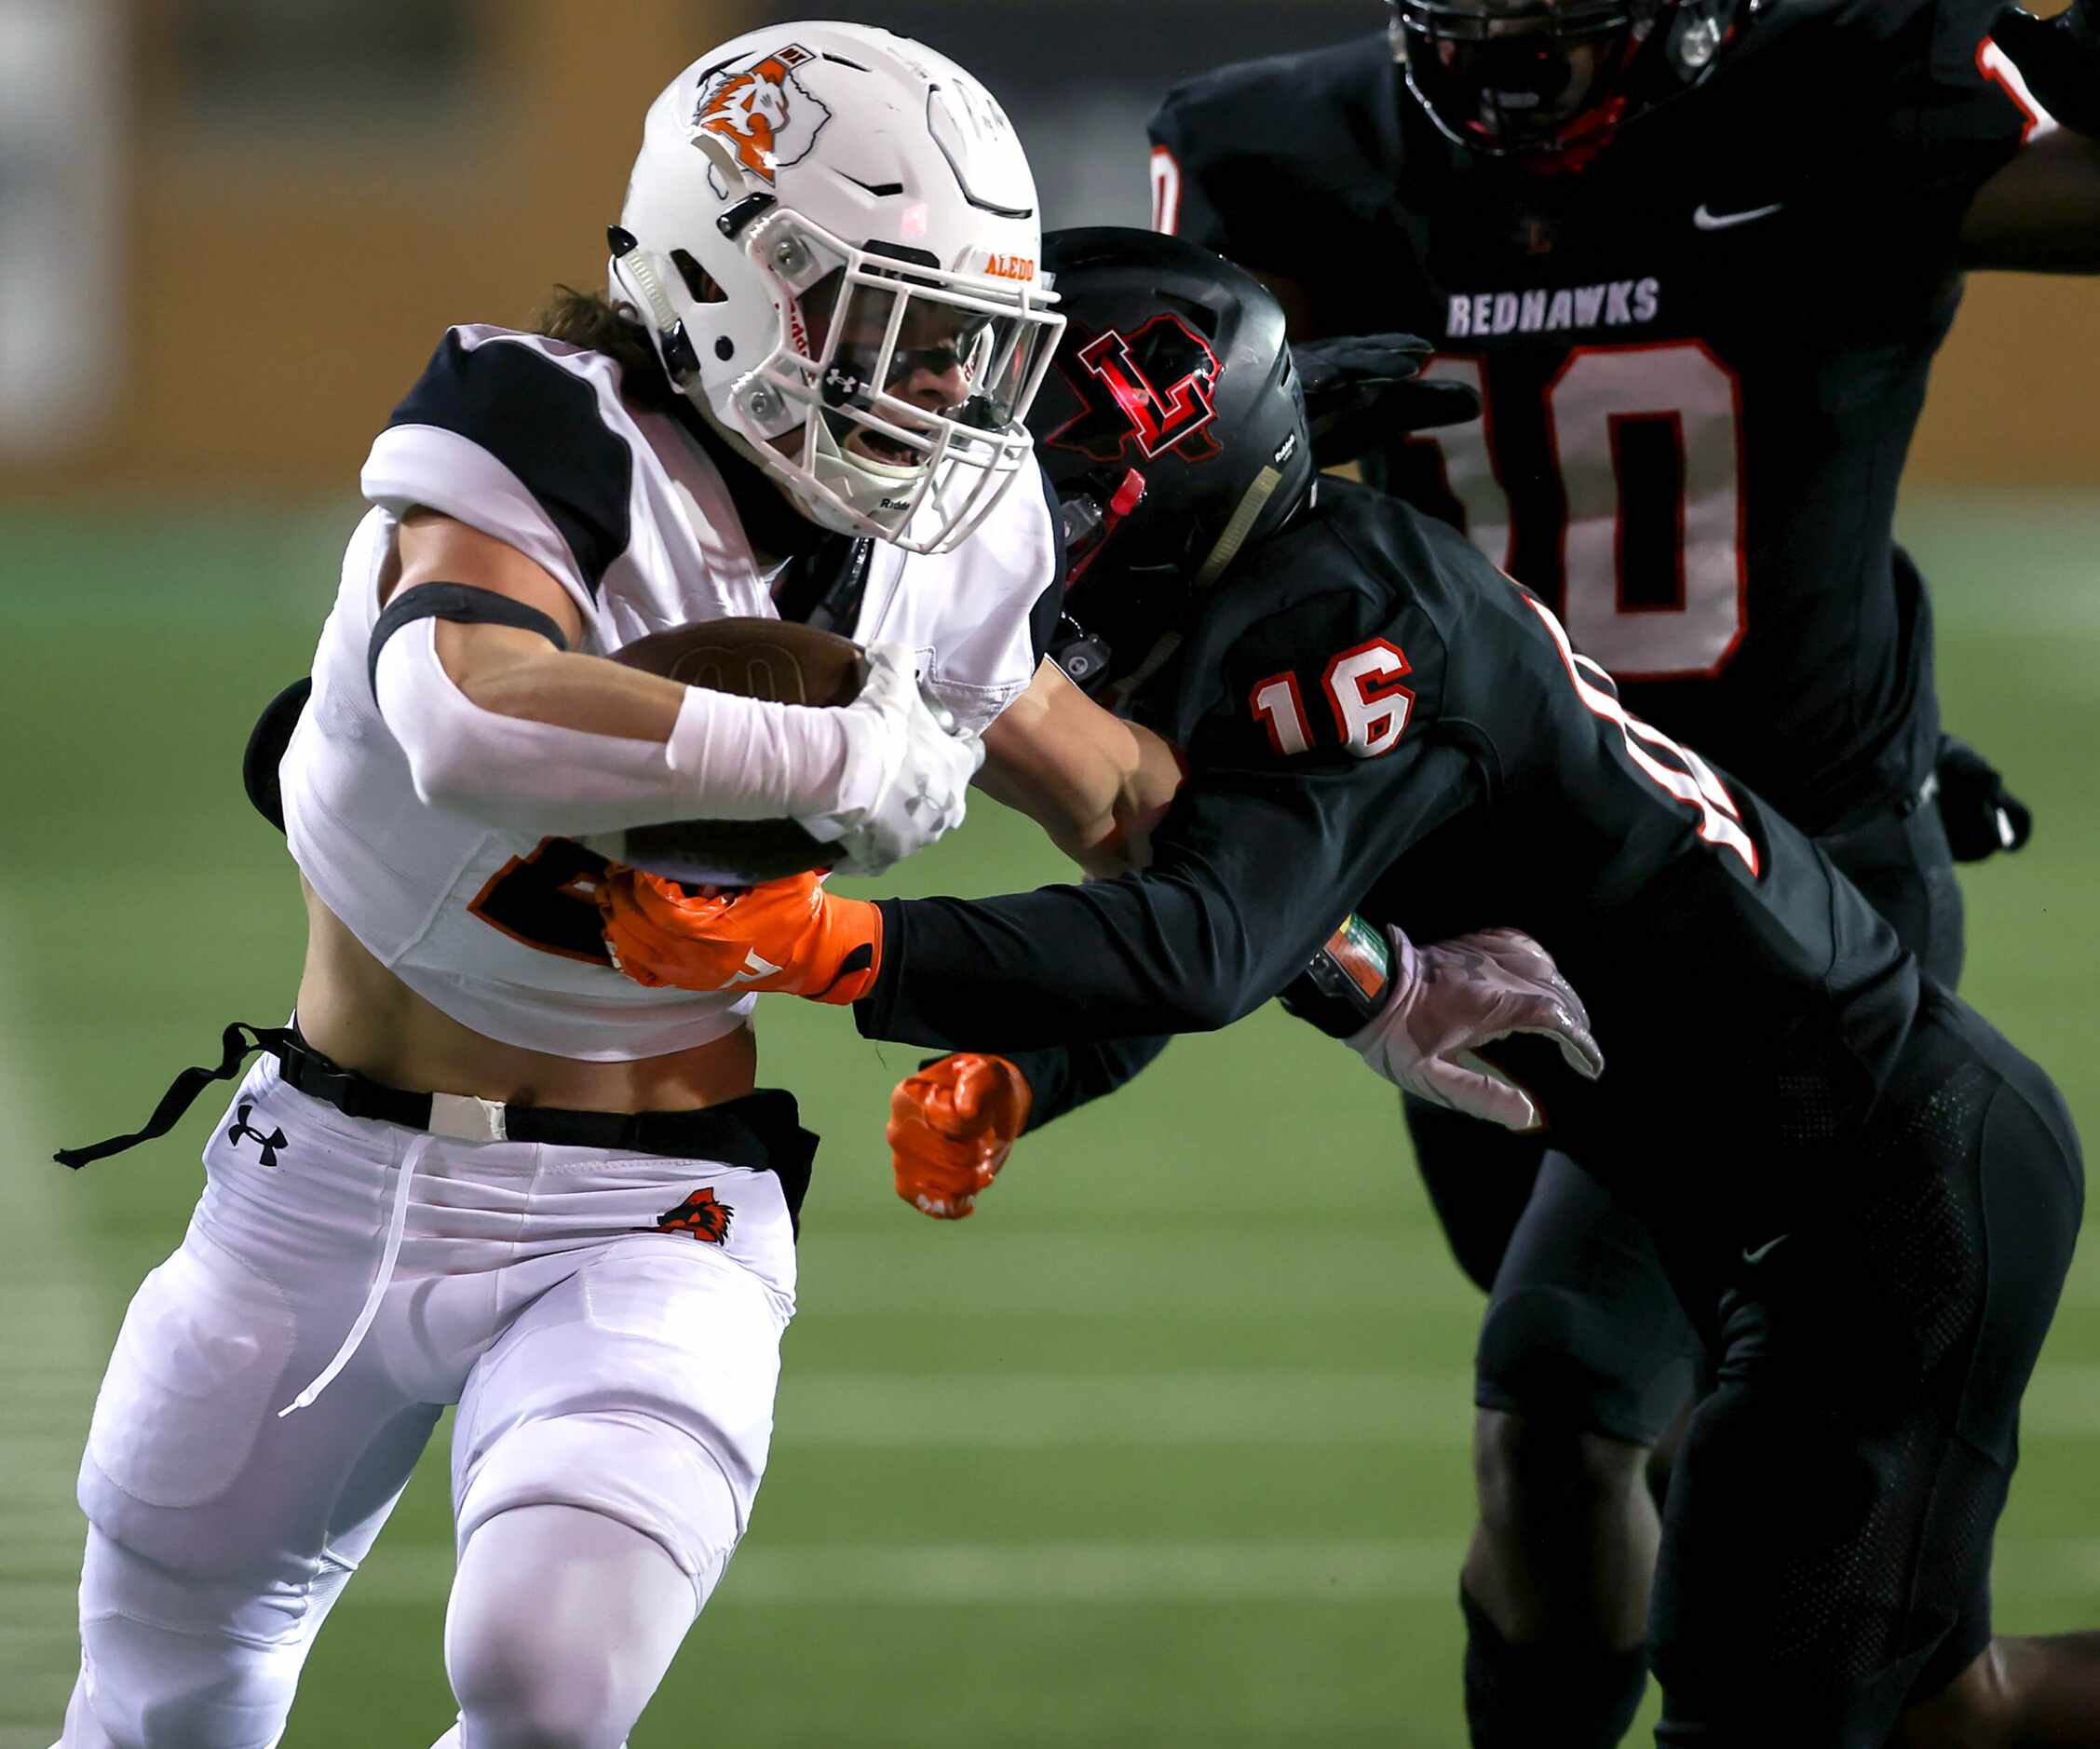 Aledo running back Sammy Steffe goes 32 yards and is stopped by Frisco Liberty cornerback...